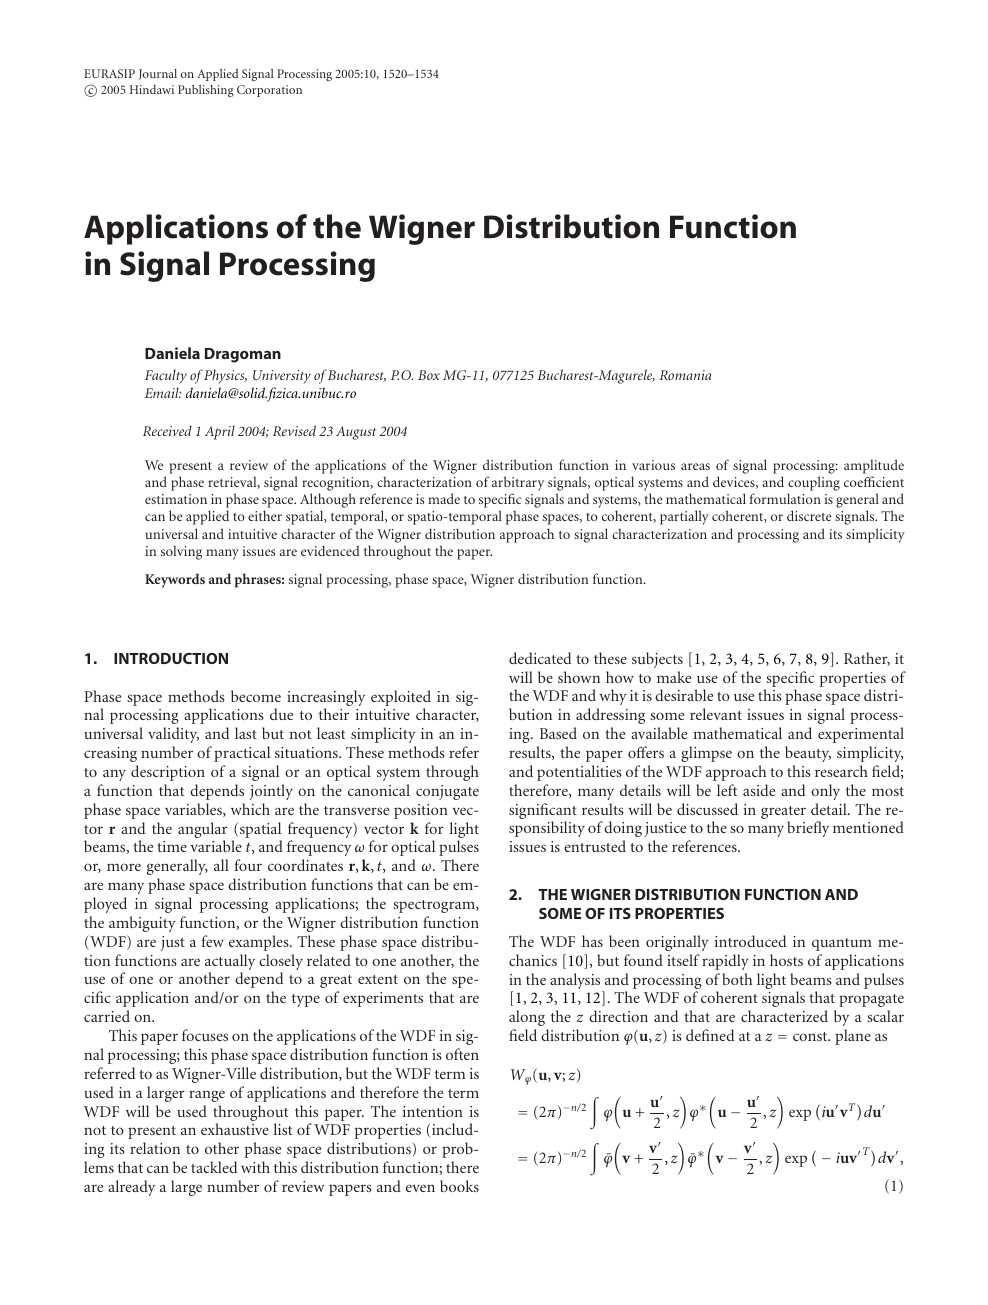 Applications Of The Wigner Distribution Function In Signal